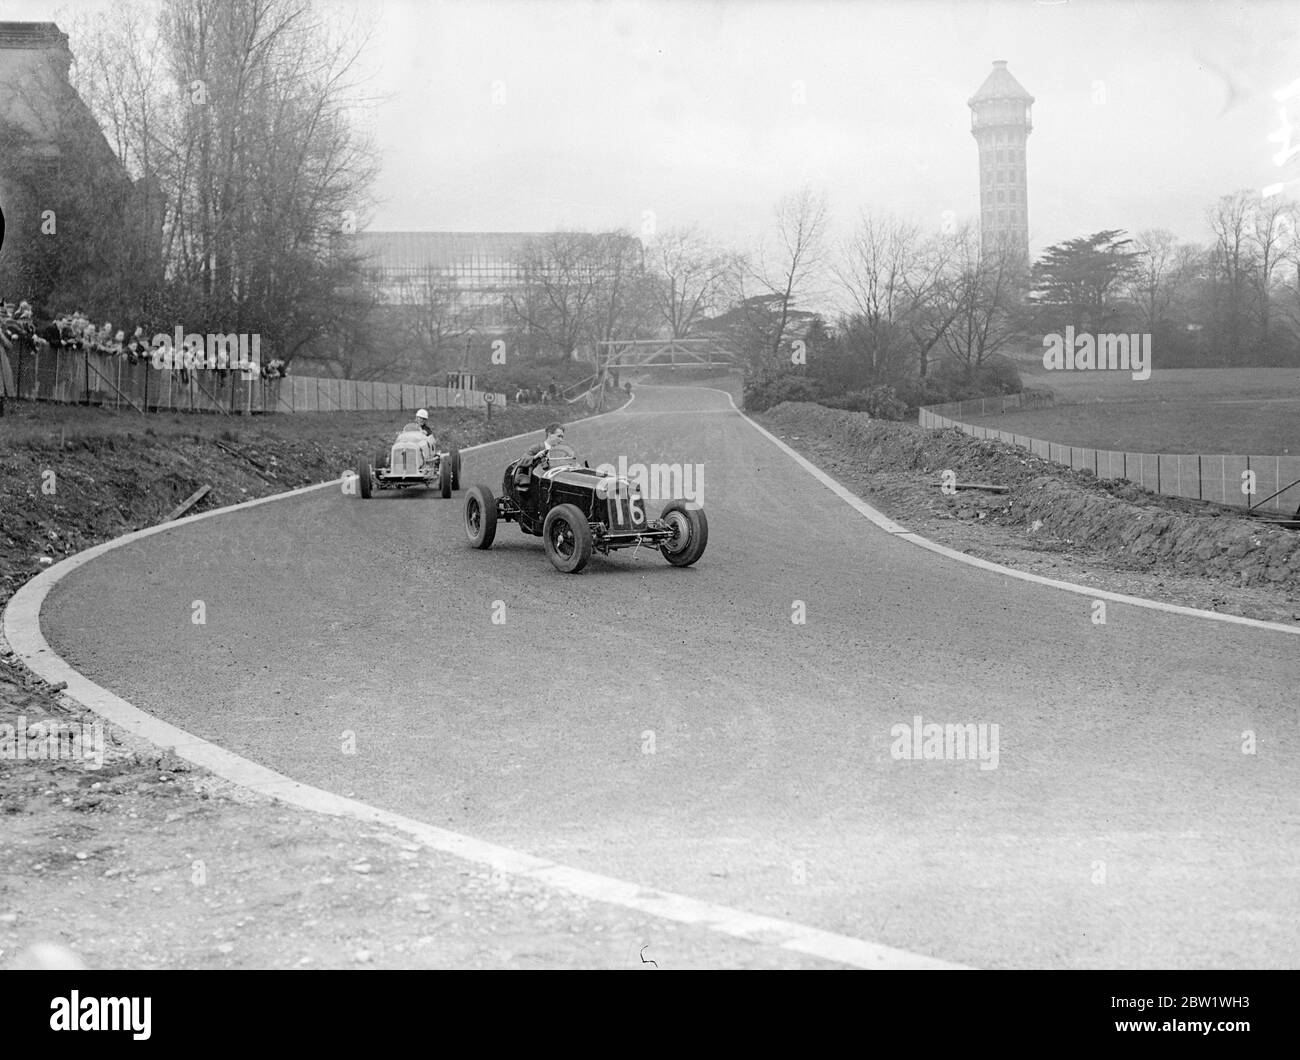 Drivers practice on new Crystal Palace track. Drivers had their first practice on the new Crystal Palace road racing circuit of the opening by Earl Howe. There were two mishaps , H J W Appleton going over the top at Stadium corner and Raymond Mays running of the track owing to wheel locking at the same spot. Photo shows, cars rounding a bend in practice on the new track. 22 April 1937 Stock Photo